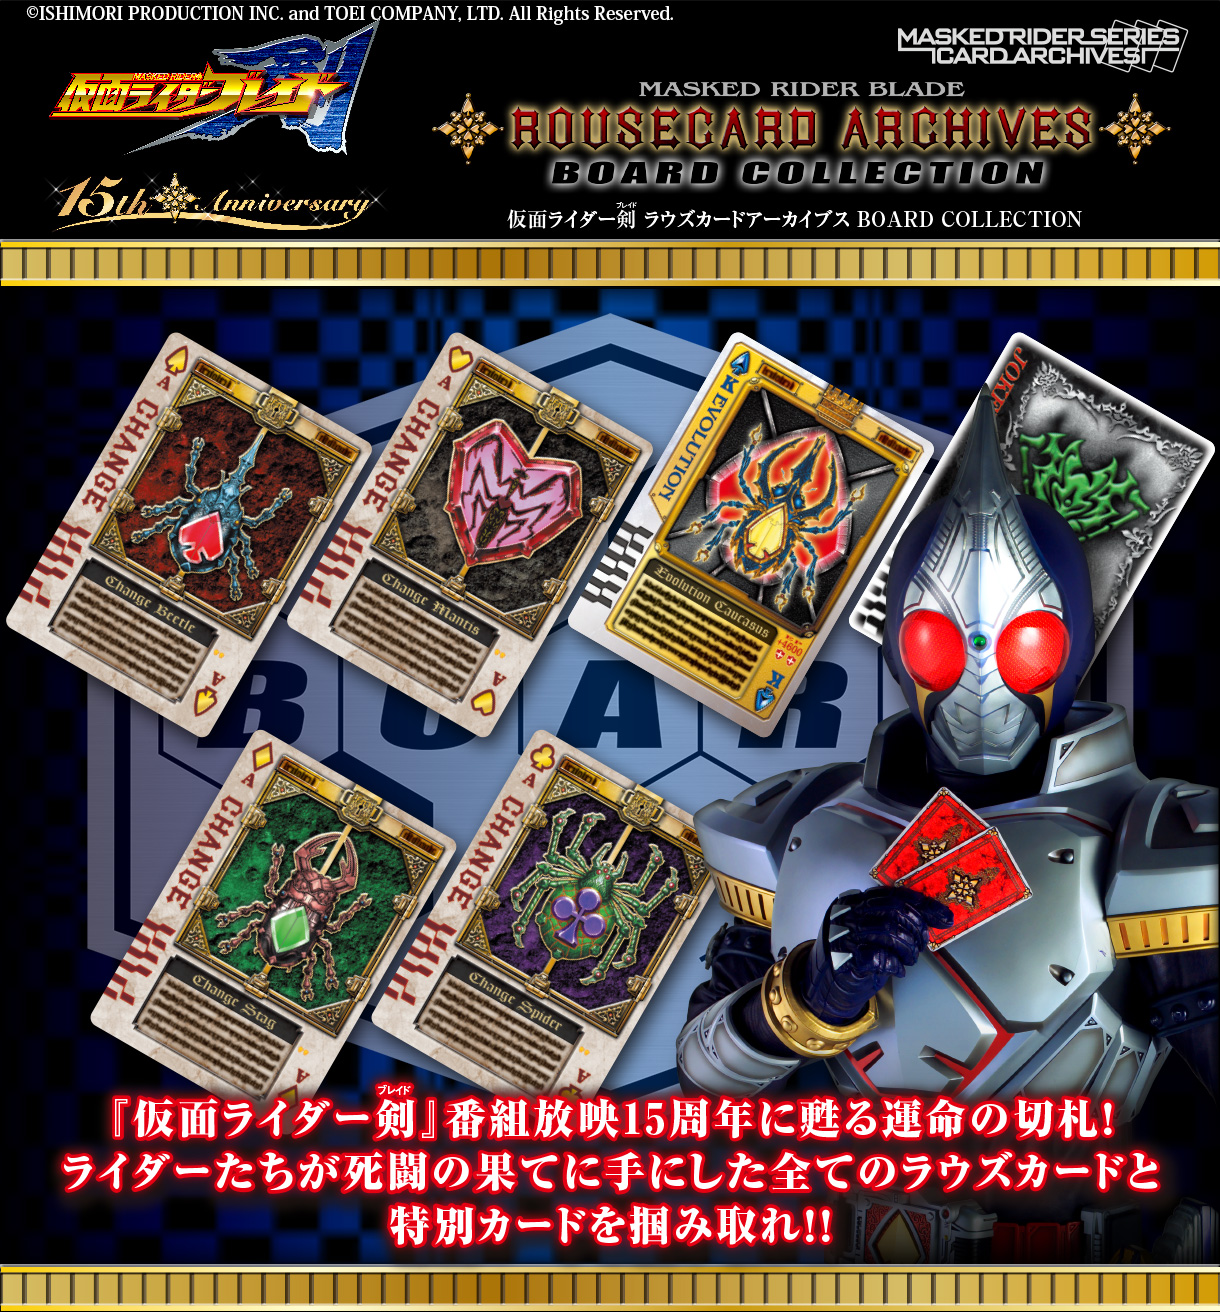 MASKED RIDER BLADE ROUSE CARD ARCHIVES CARD SELLECTION | KAMEN 